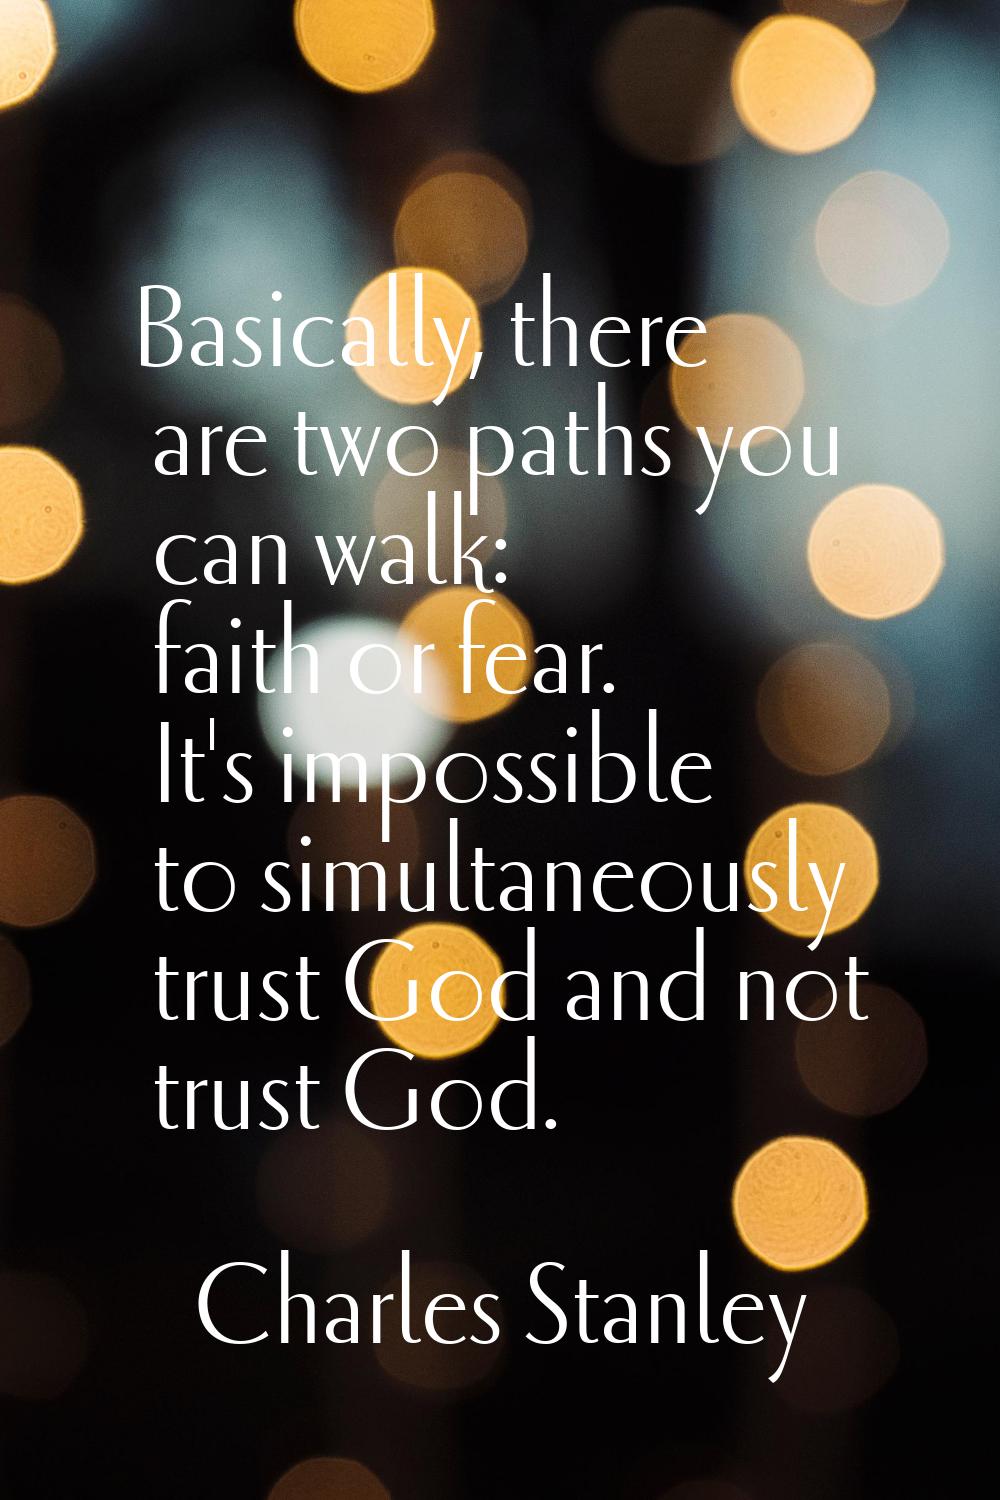 Basically, there are two paths you can walk: faith or fear. It's impossible to simultaneously trust